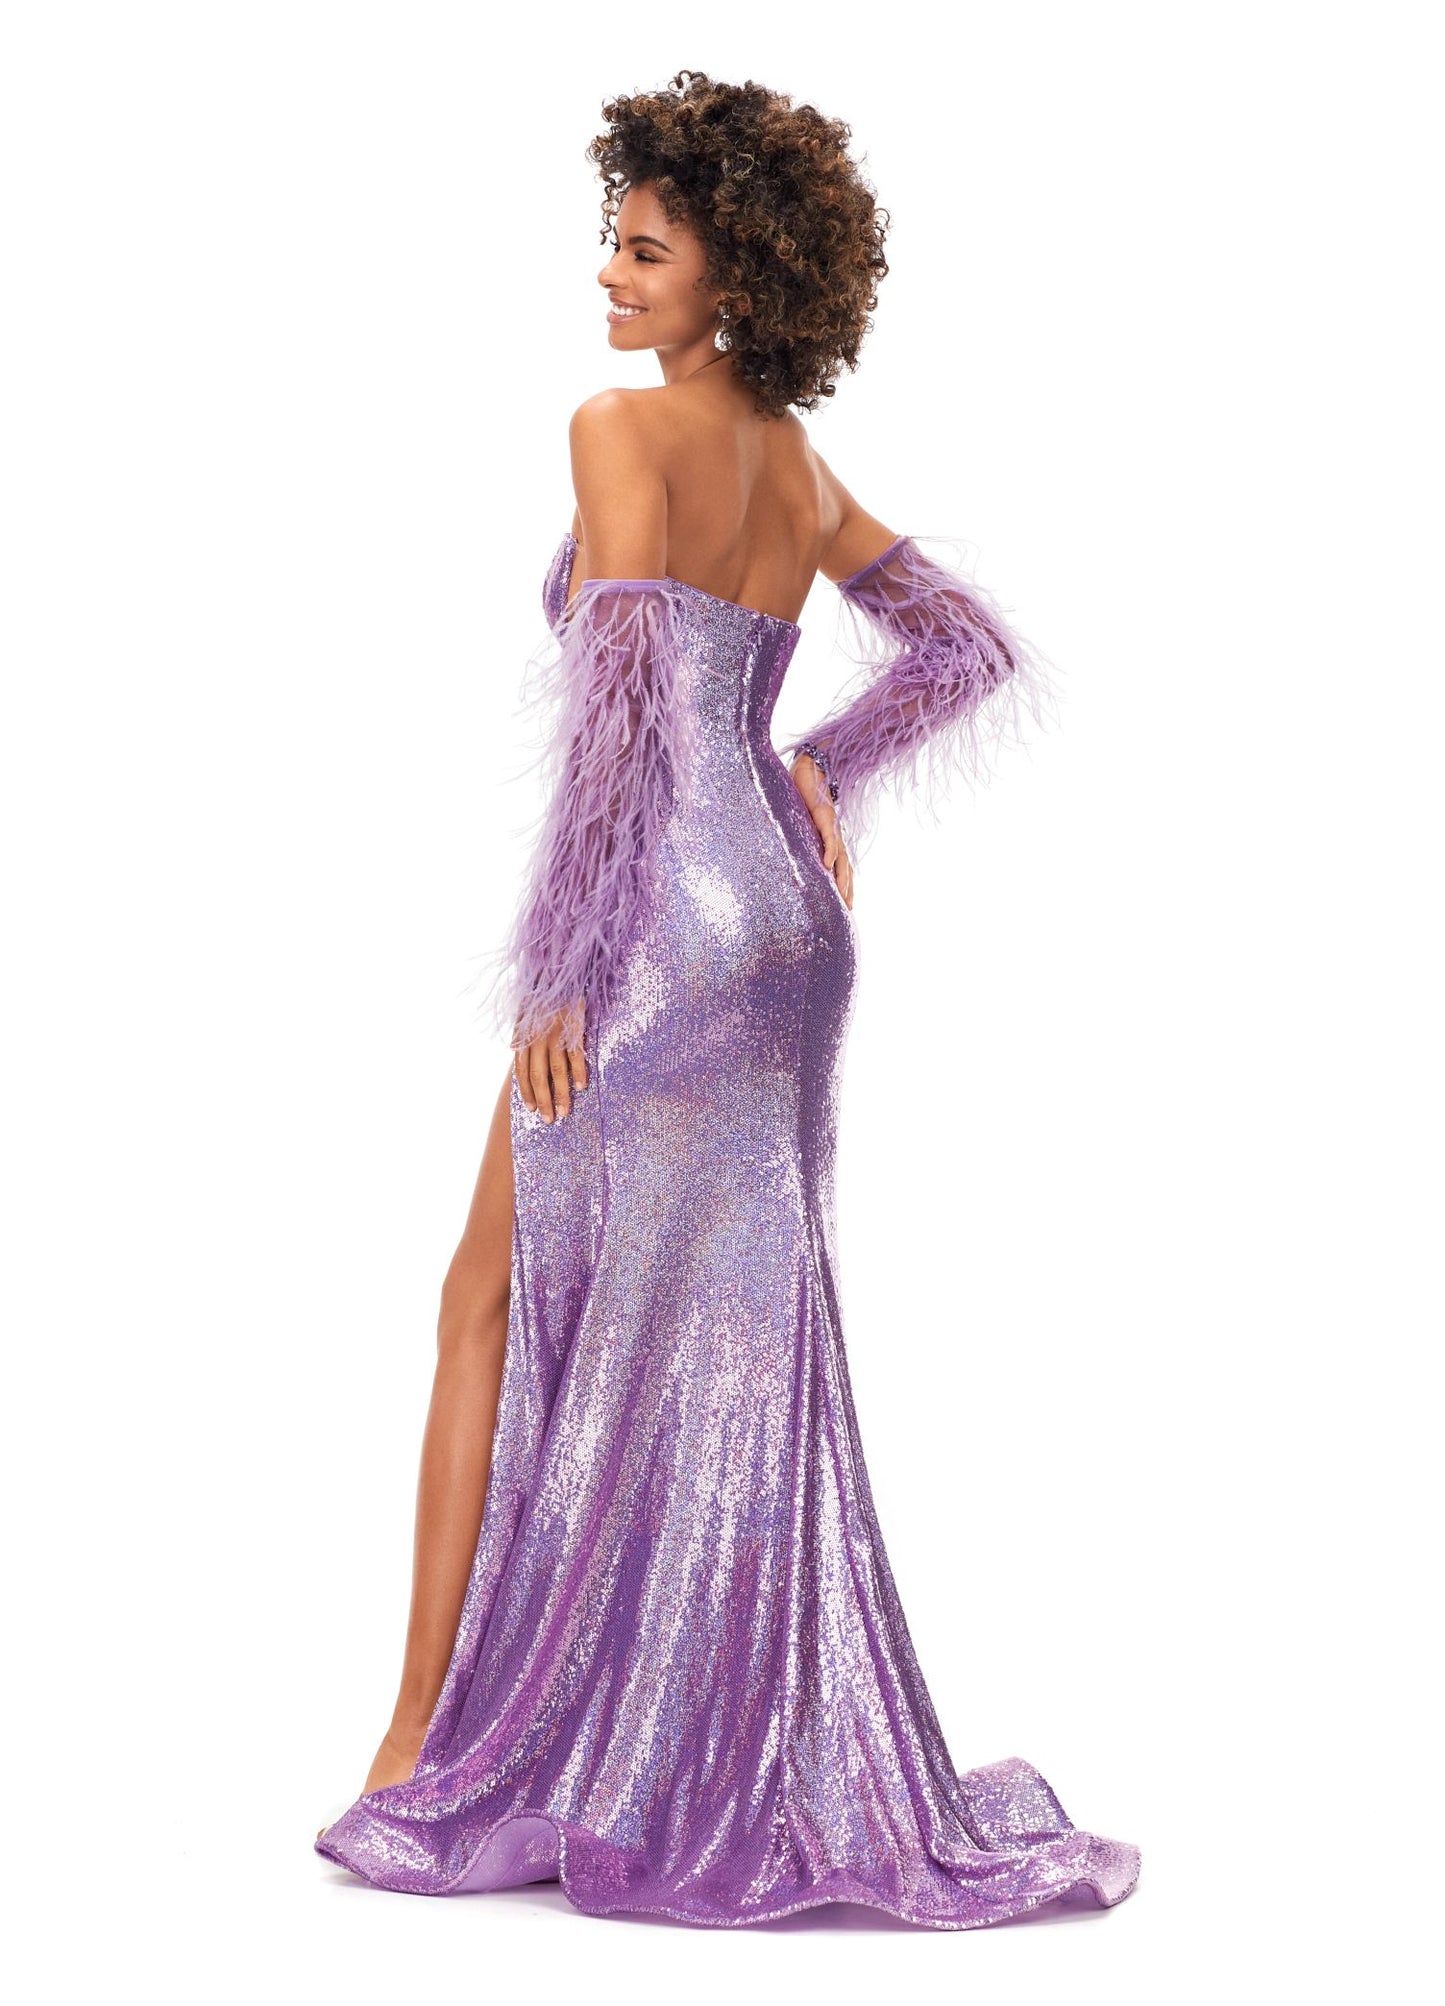 Ashley Lauren 11301 Sequin Prom Dress with Feather Sleeves